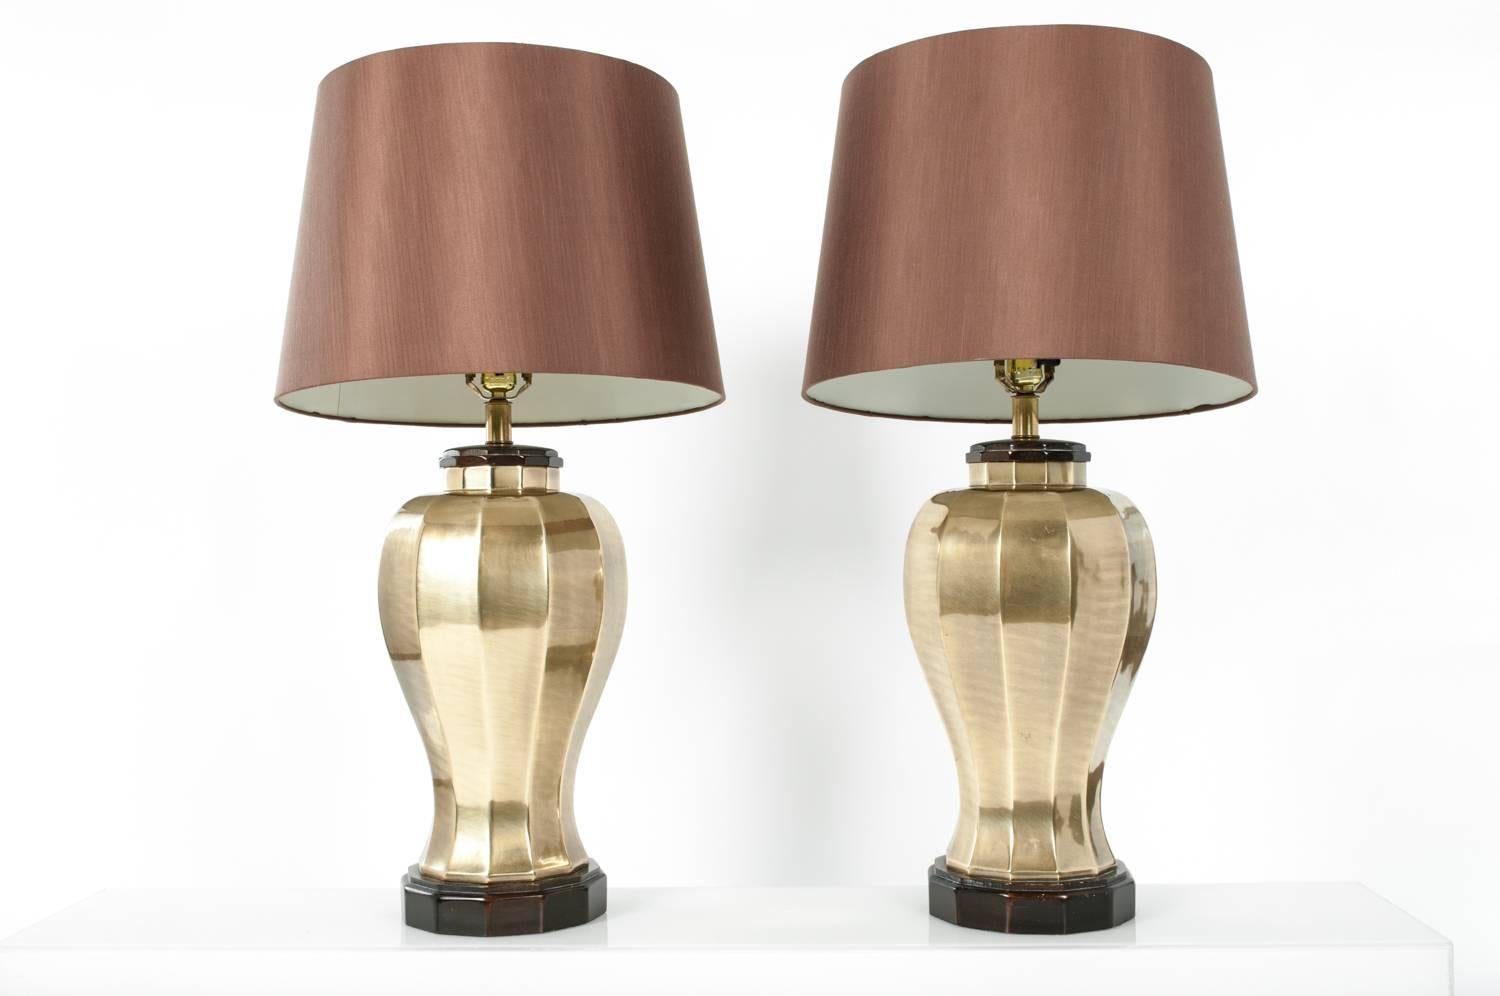 American brass Chinoiserie ginger jar form table lamps by Frederick Cooper of Chicago. Rare lidded urns with round necks and octagonal shaped bodies Hollywood Regency style table lamps. The lamps come with round brown drum shade. Each lamp stand